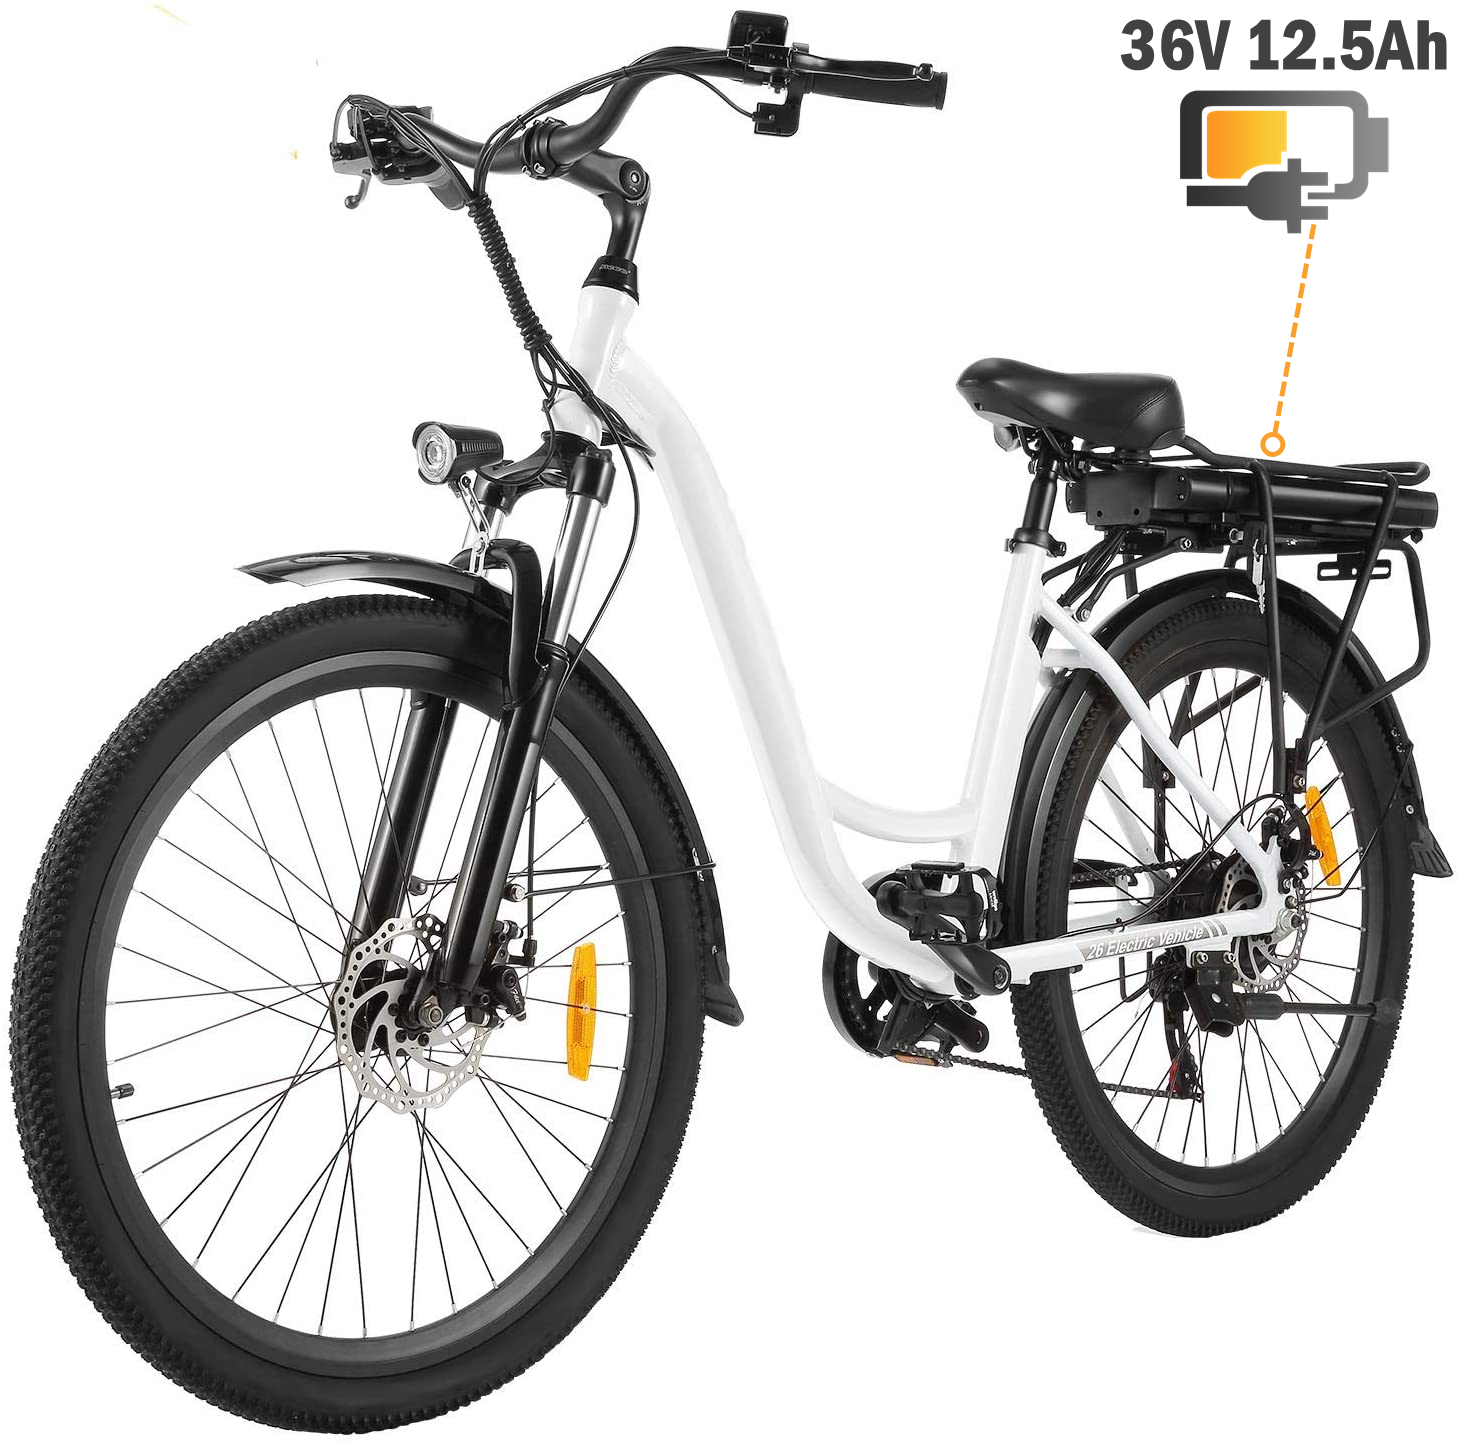 26" Electric Commuter Bicycle, Beach Cruiser Electric Bike for Women, Removable 12.5Ah Battery, Professional Derailleur with 6 Speed City Ebike, White